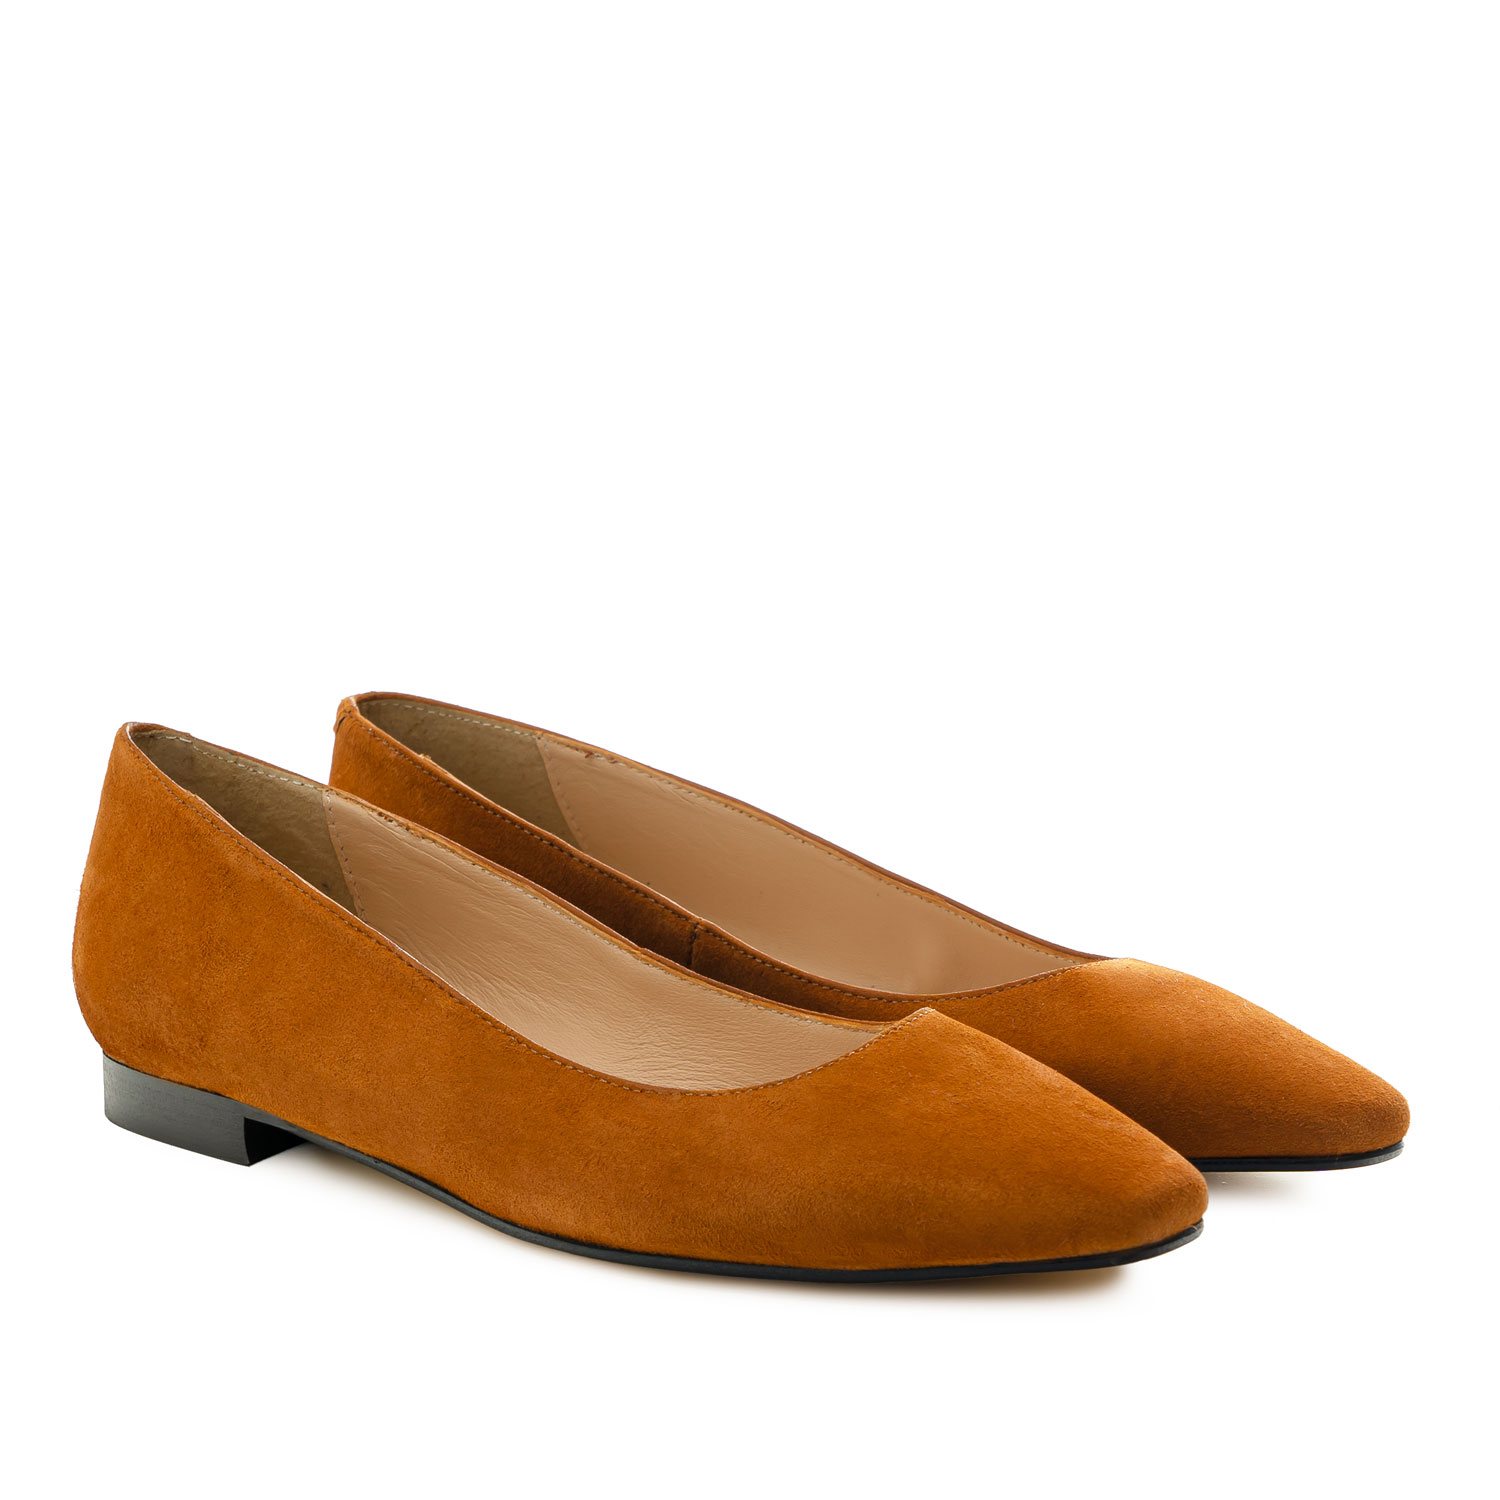 Ballet Flats in Tan-coloured Suede Leather 